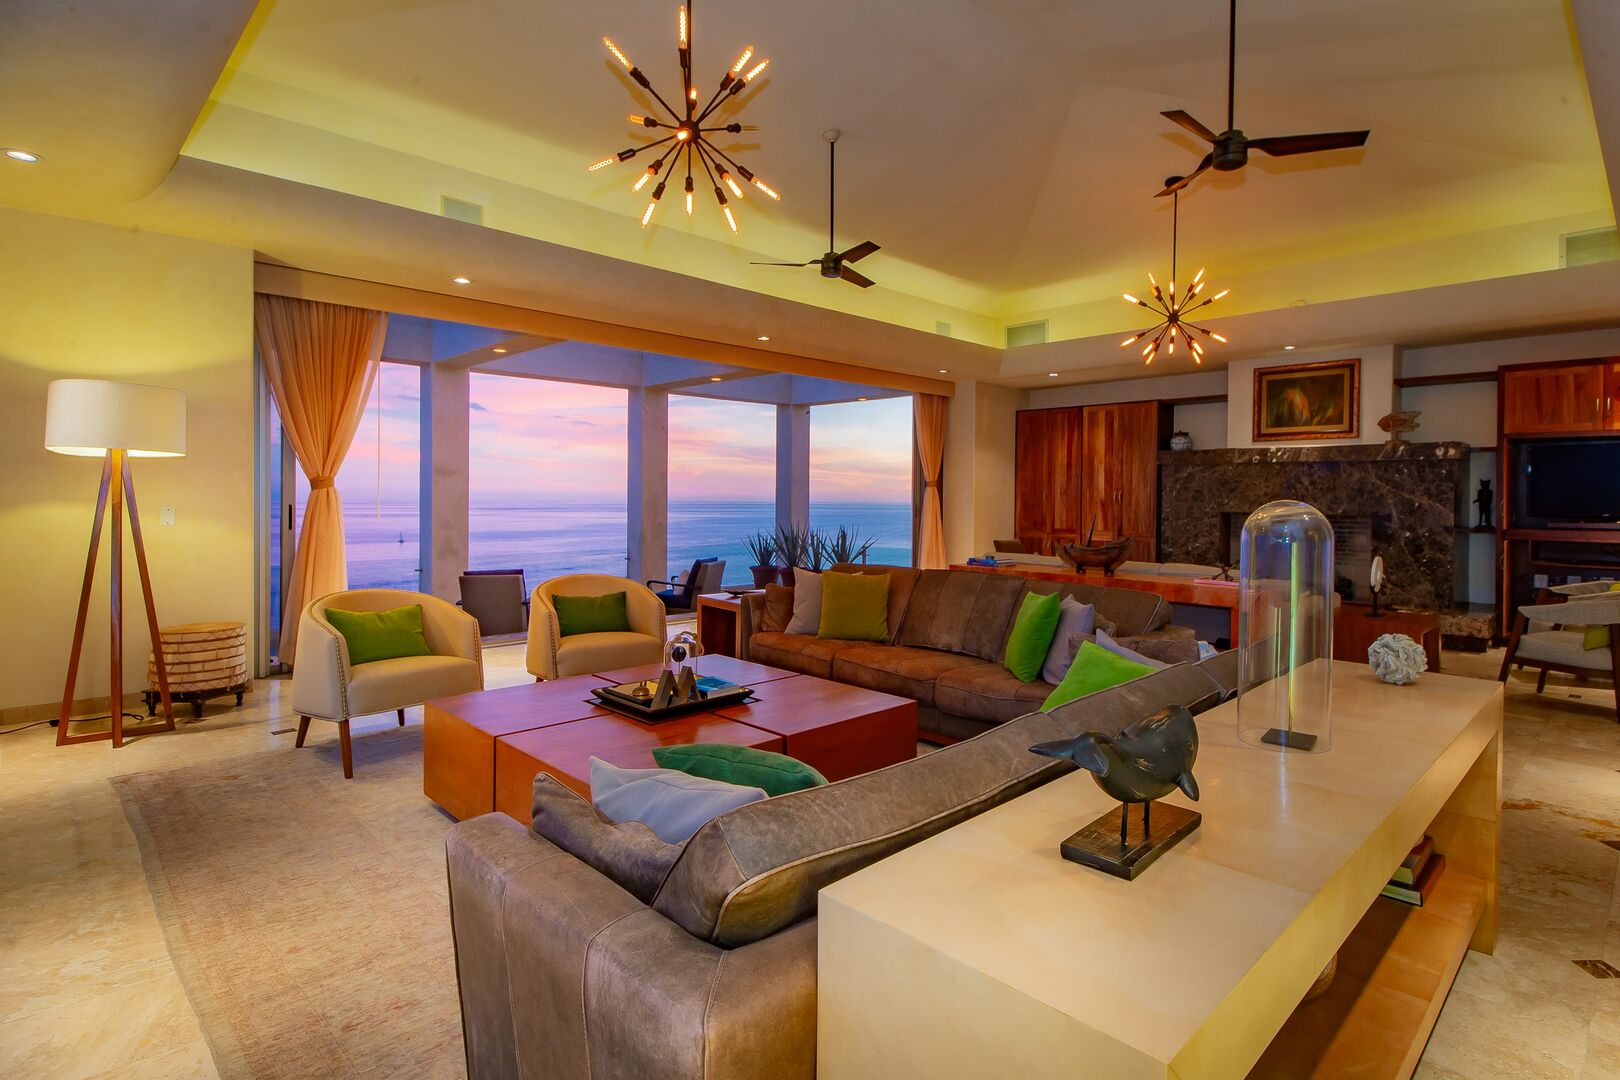 A large living room with a big sectional couch and a view of the ocean through the windows.